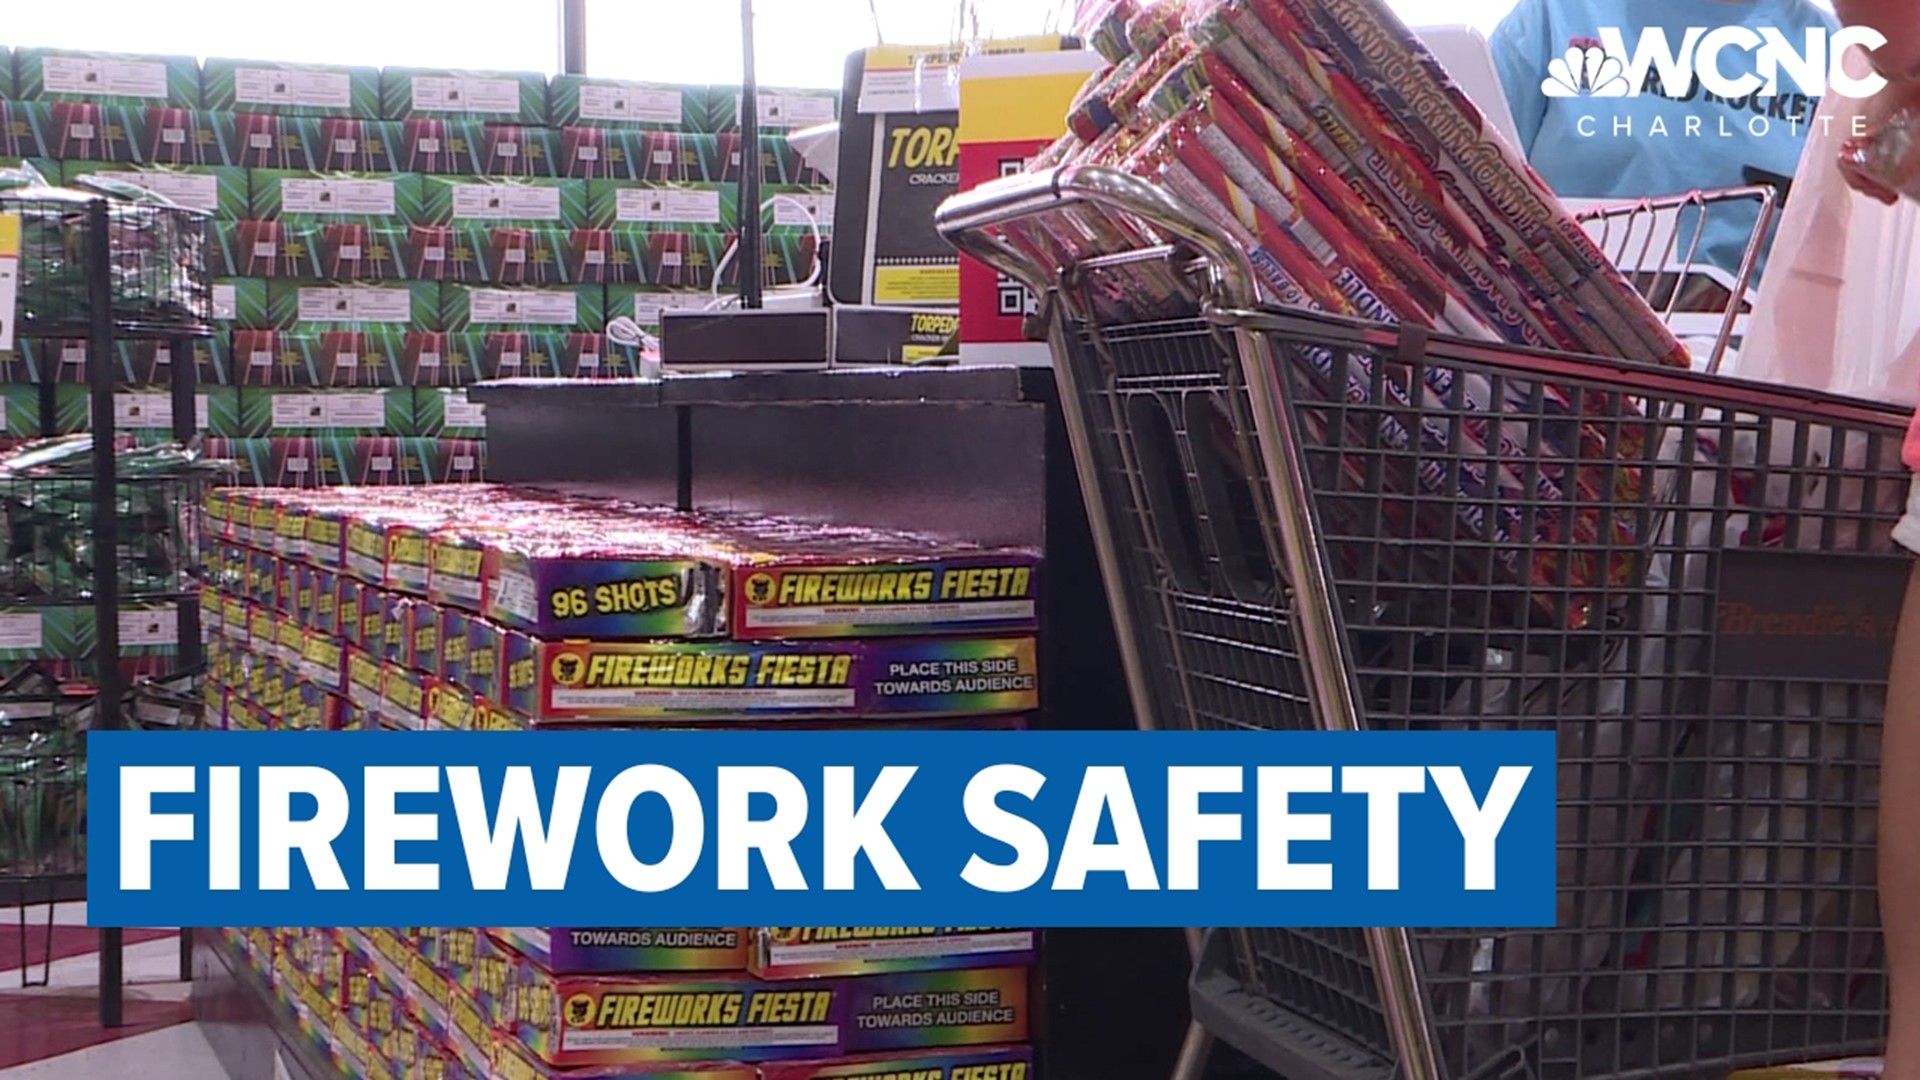 With the holiday weekend here, Ben Thompson shares some recommendations for how to stay safe while handling fireworks.